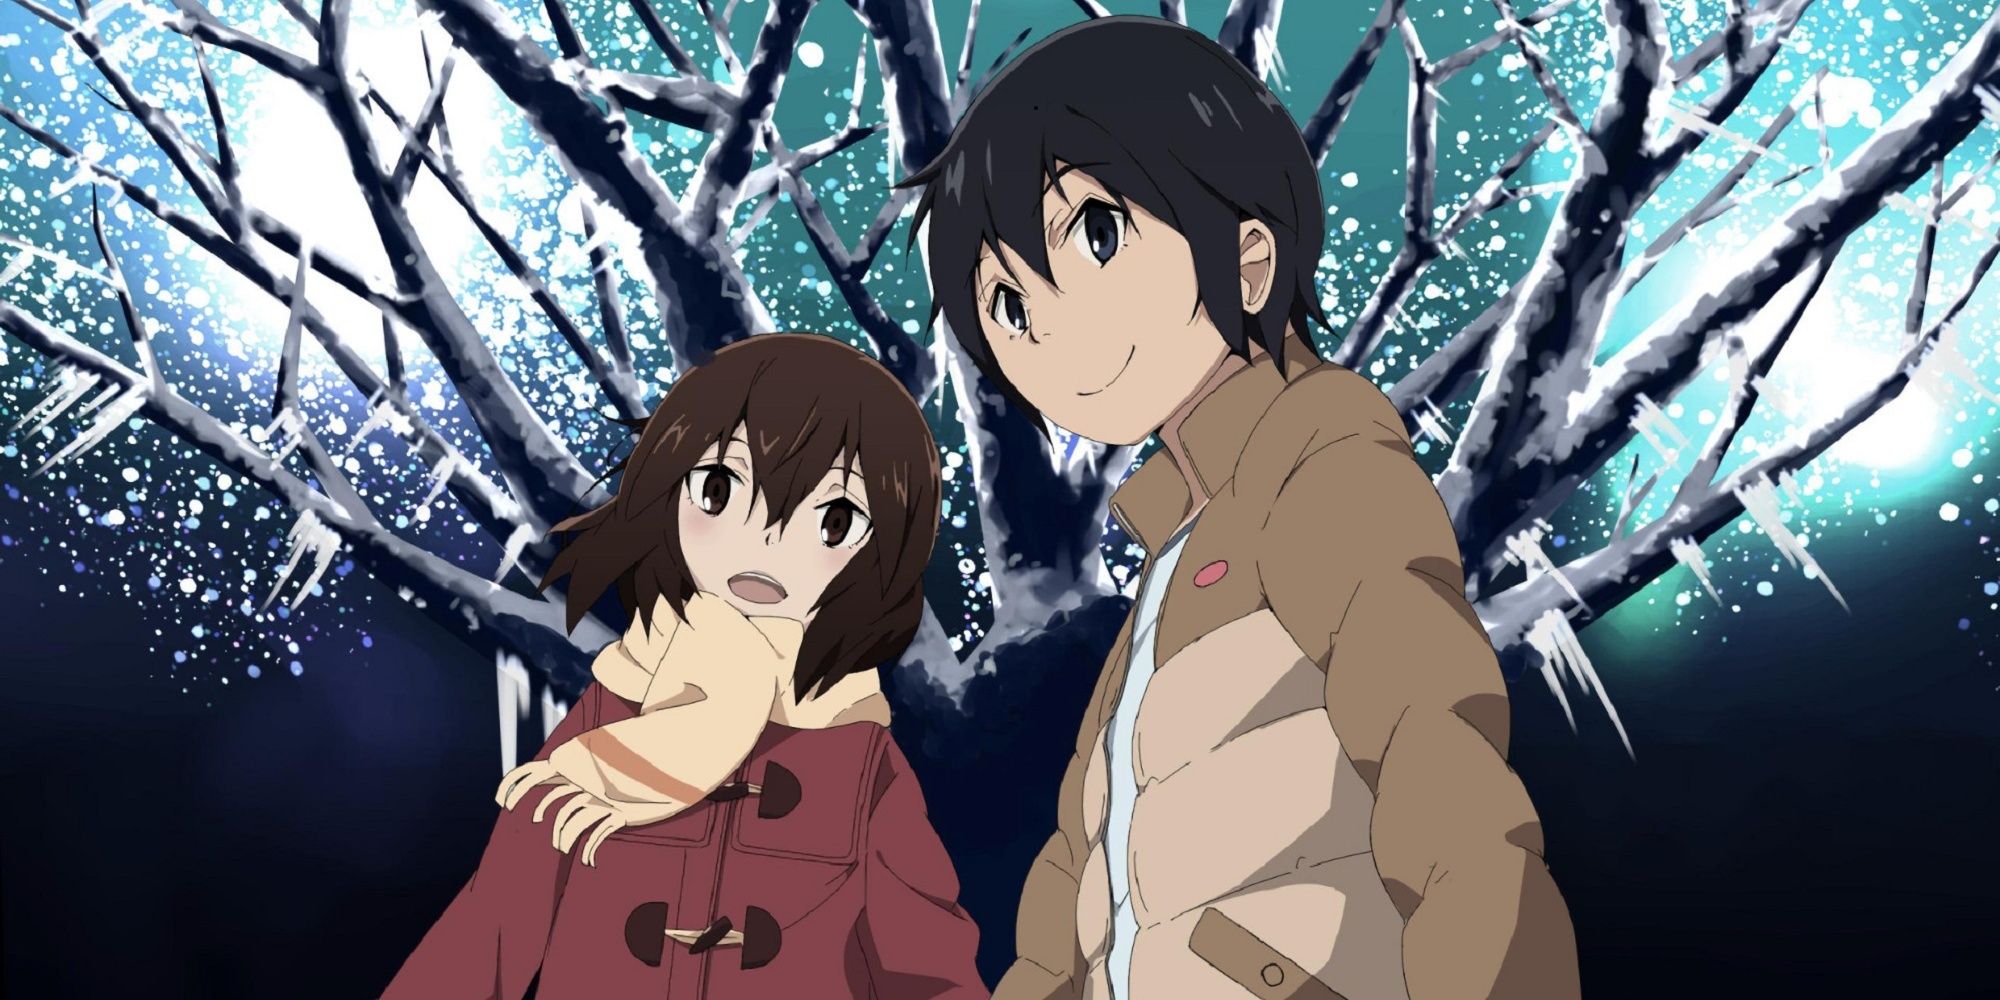 Satoru and Kayo in front of a snowy tree in 'Erased.'